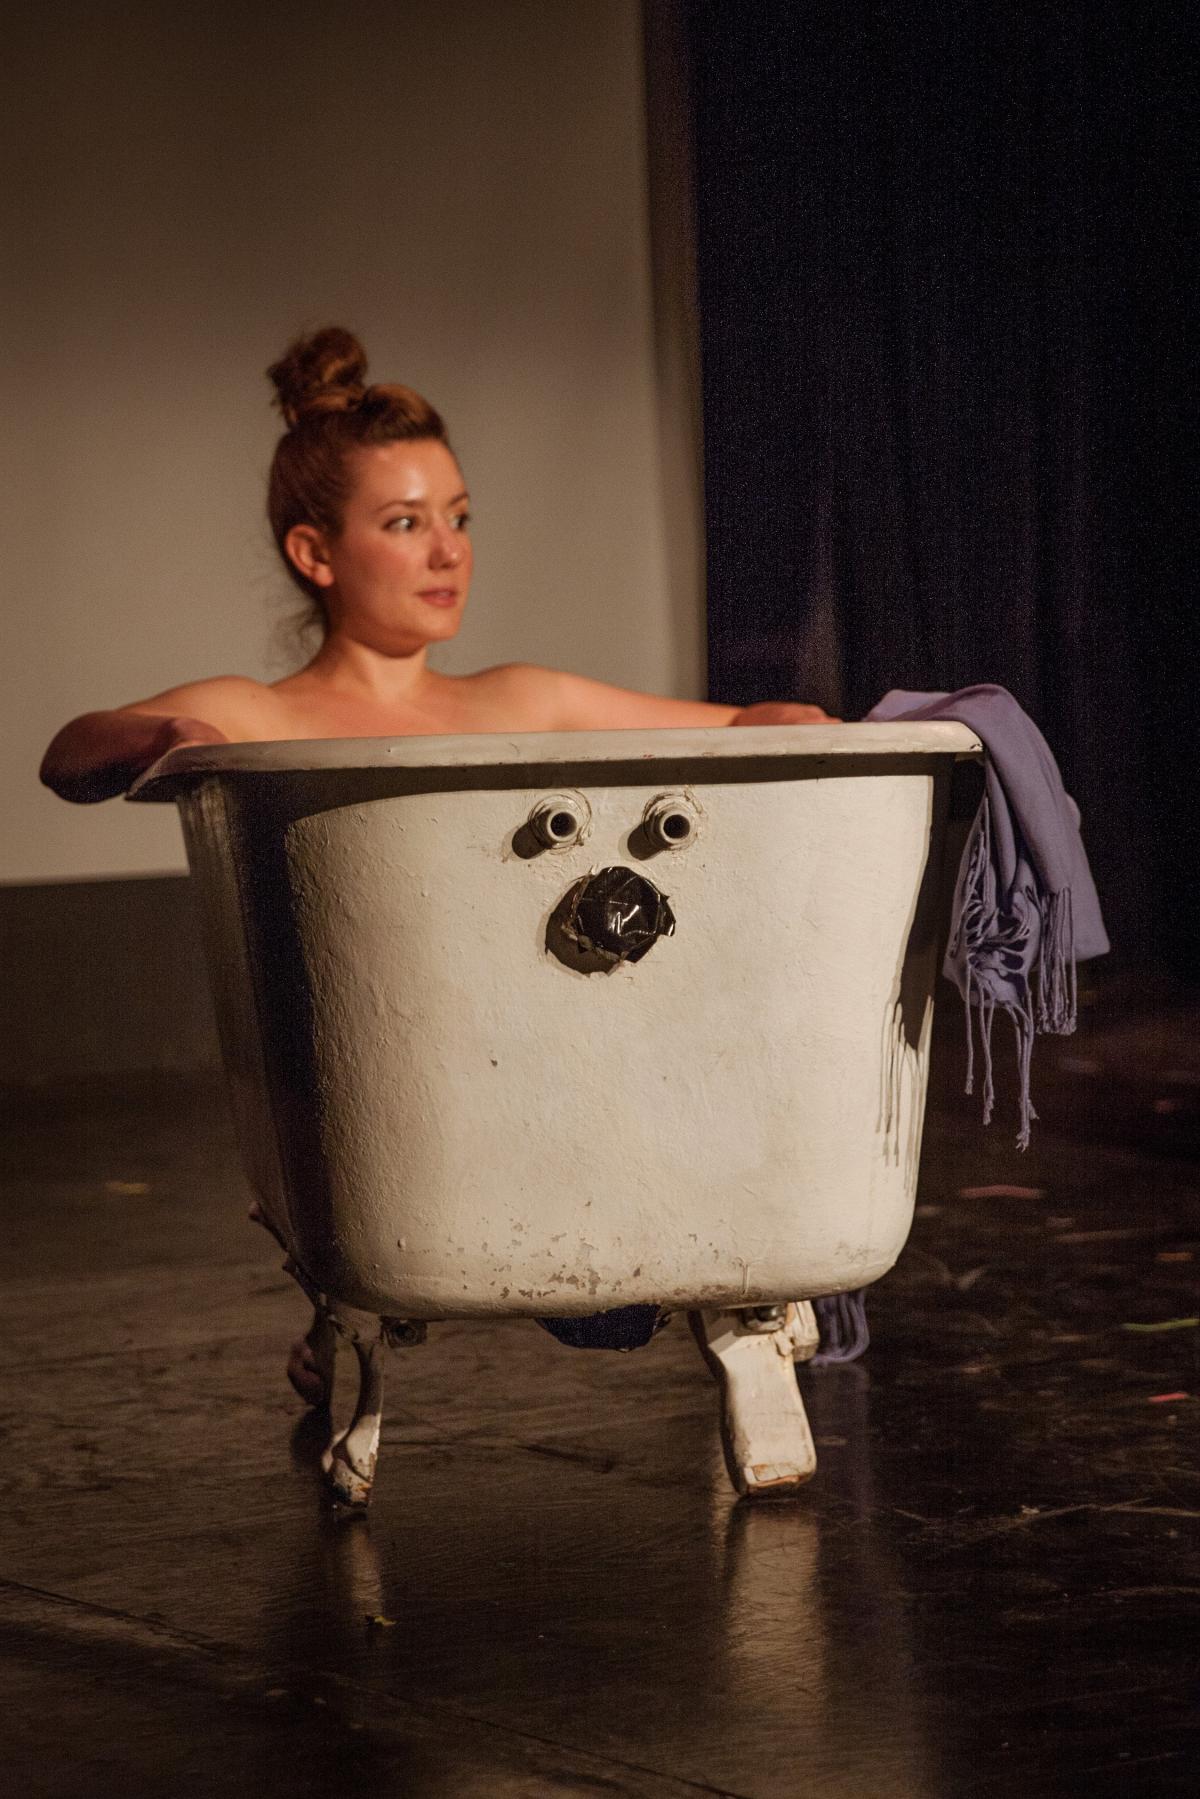 A Bath Features In The Play Referencing The Tragic 542b8b4f2b.JPG?itok=9zyxlZWS